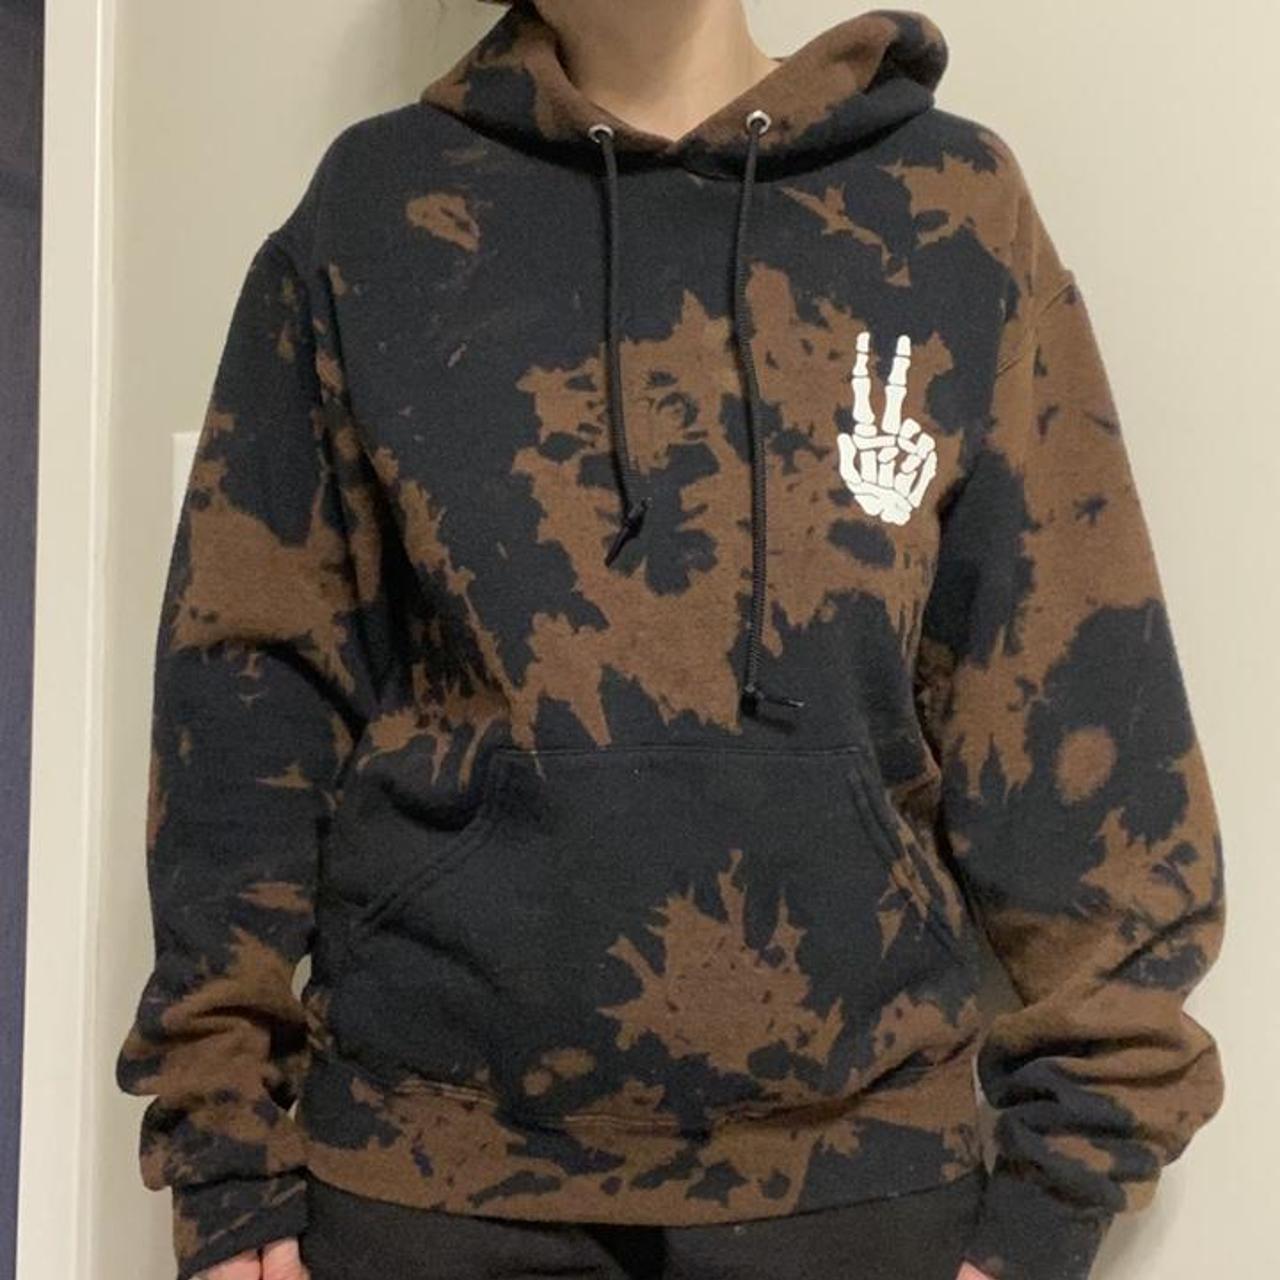 Product Image 2 - Size small hoodie from Marshall’s
Great